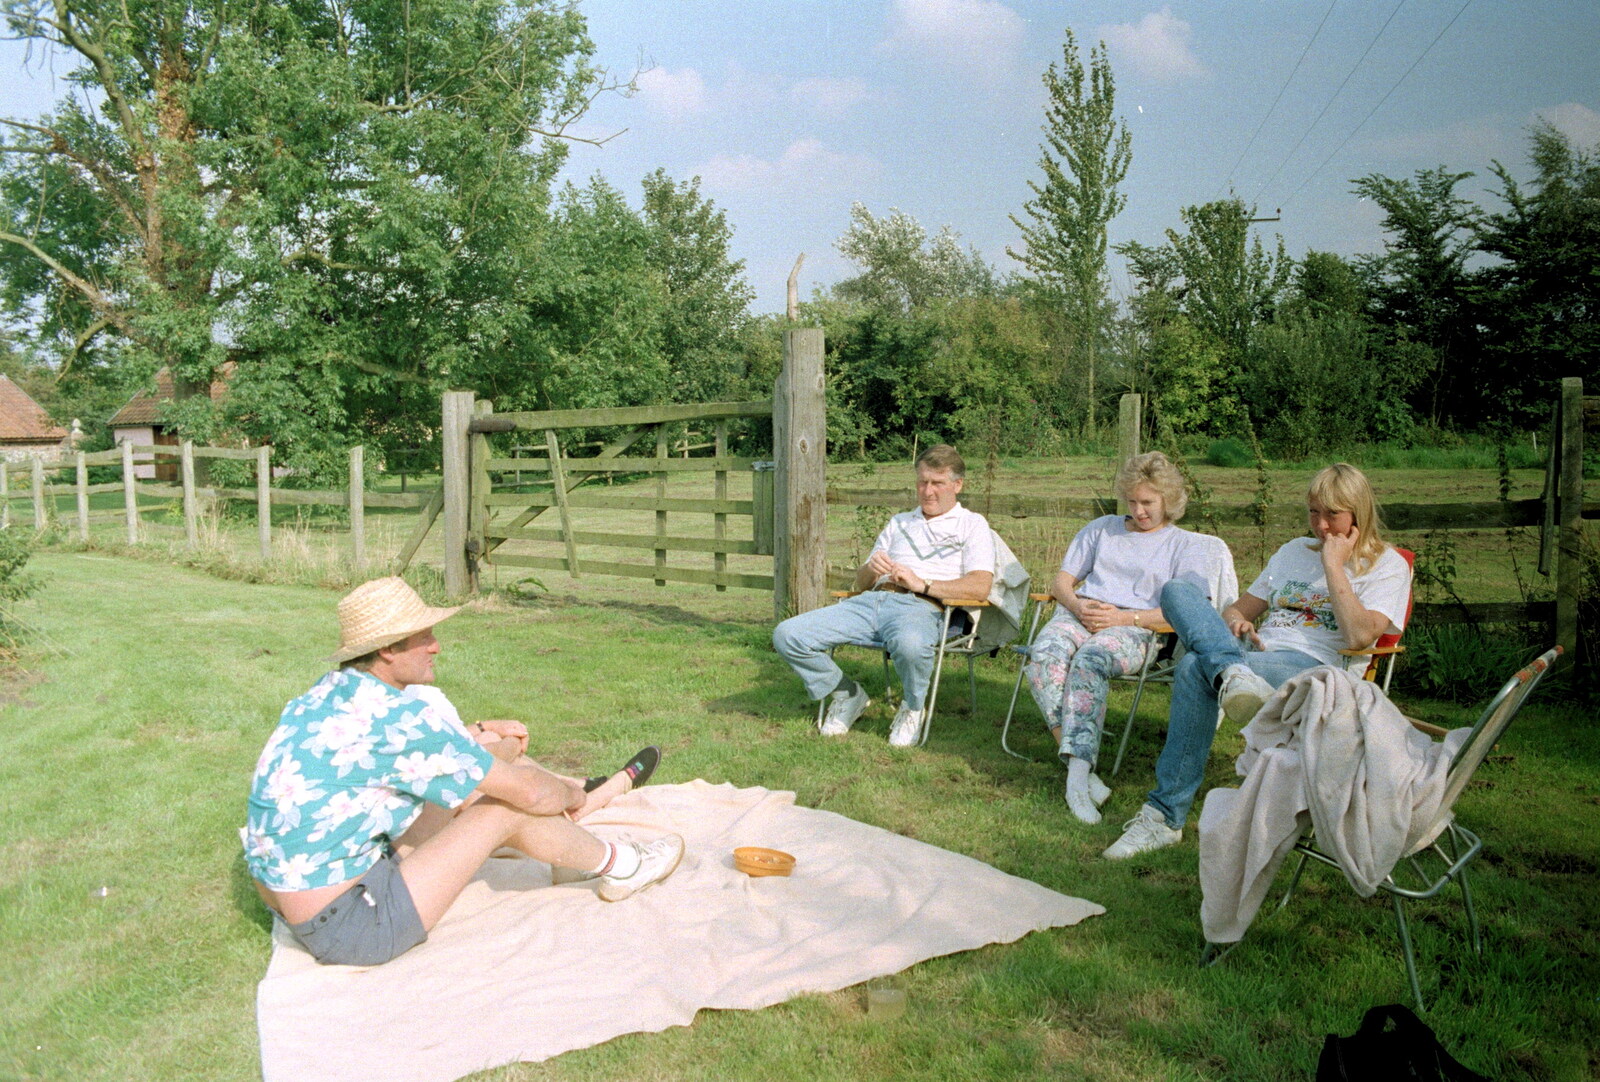 Geoff on a blanket from A Geoff and Brenda Barbeque, Stuston, Suffolk - 3rd April 1994